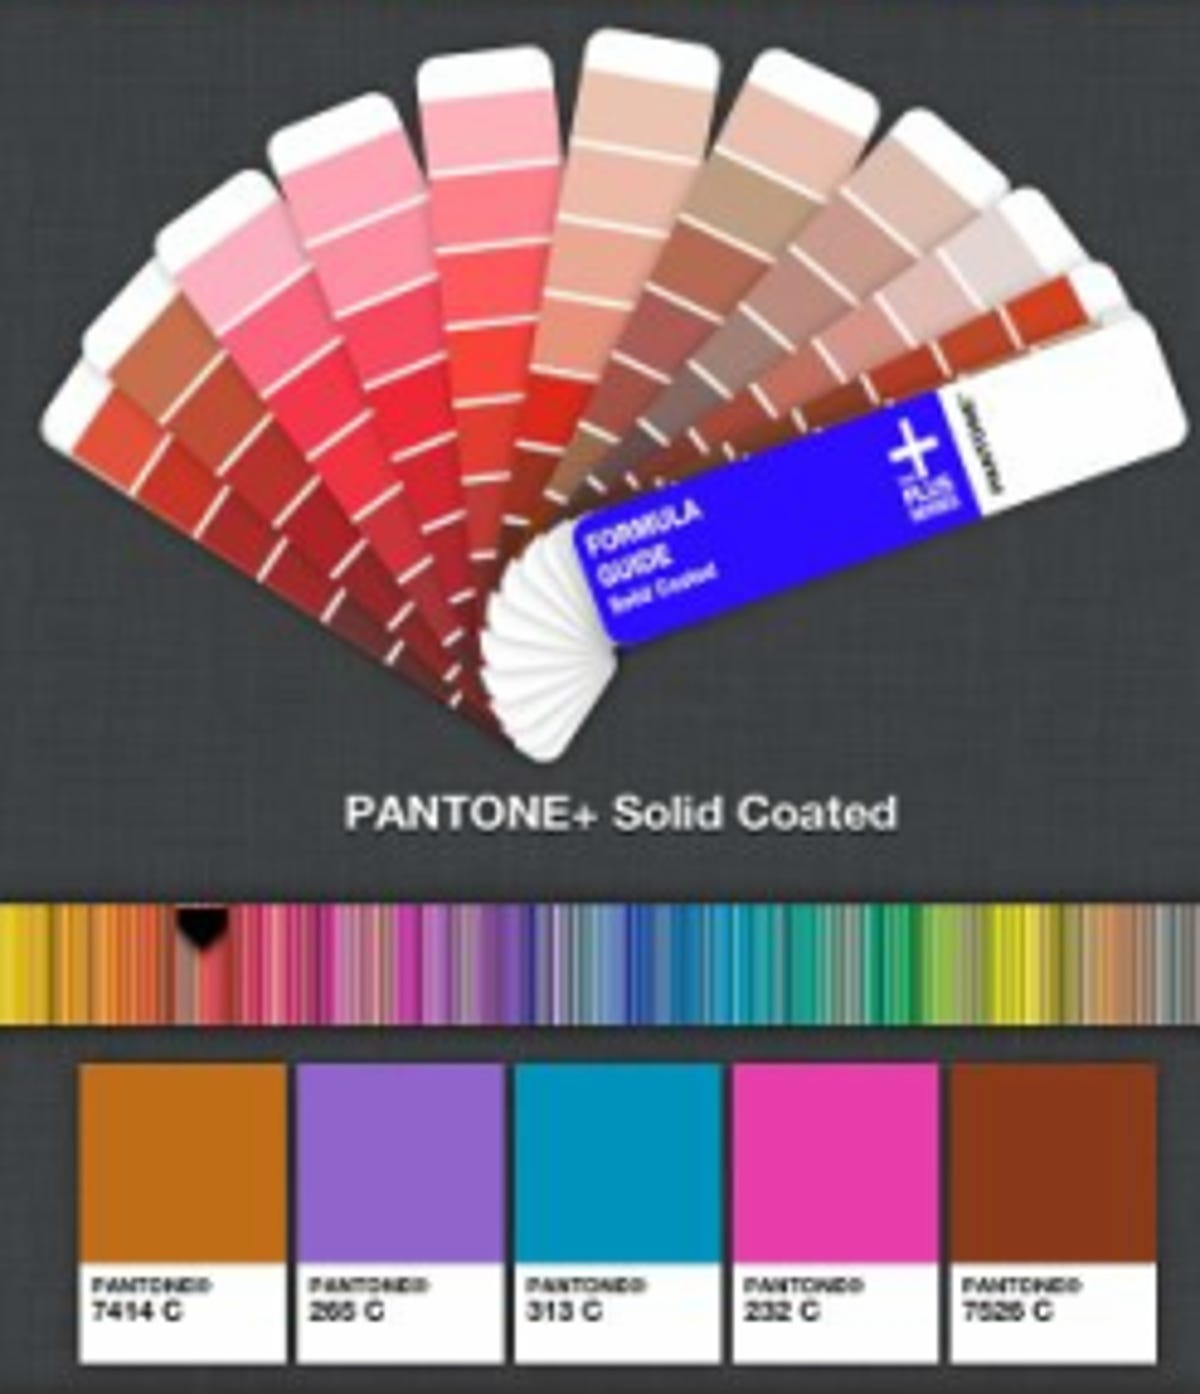 Pantone iPhone app with color charts